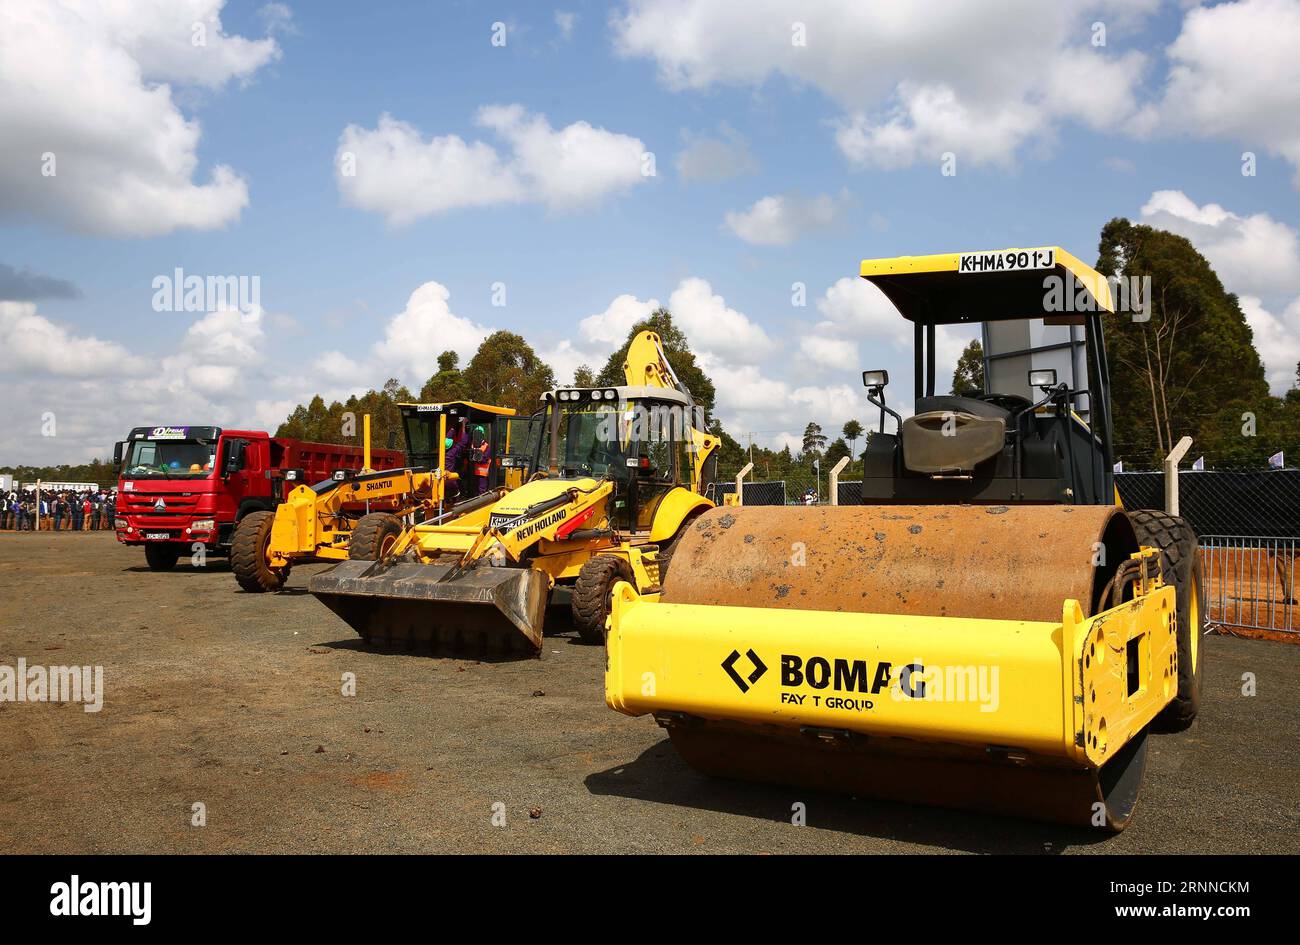 (170707) -- ELDORET(KENYA), July 7, 2017 -- Construction vehicles are seen at the launching ceremony of the Special Economic Zone project in Eldoret, Kenya, on July 7, 2017. Kenya on Friday launched a Special Economic Zone (SEZ) project that is expected to attract about 2 billion U.S. dollars of foreign investments. The project is a joint venture between Kenyan-based company Africa Economic Zone and China s Guangdong New South Group. ) KENYA-ELDORET-SPECIAL ECONOMIC ZONE-LAUNCHING CEREMONY PanxSiwei PUBLICATIONxNOTxINxCHN   Eldoret Kenya July 7 2017 Construction VEHICLES are Lakes AT The Launc Stock Photo